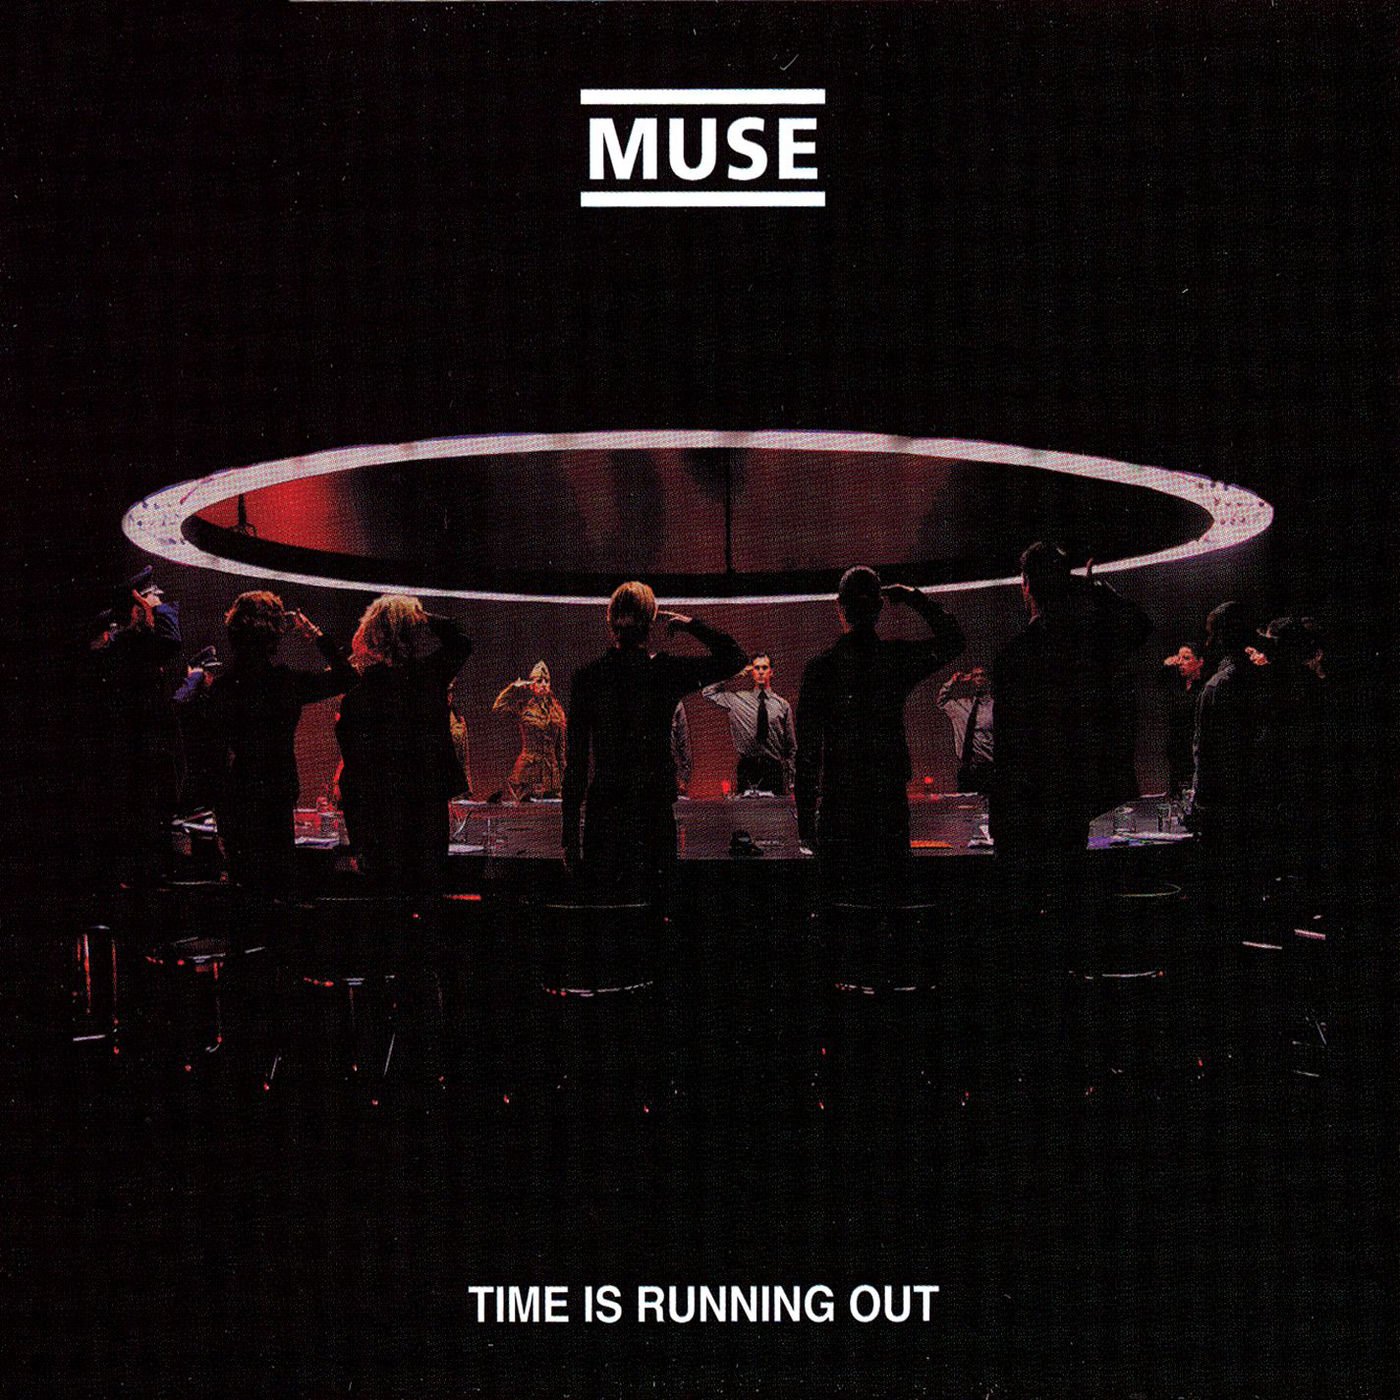 Muse — The Groove cover artwork